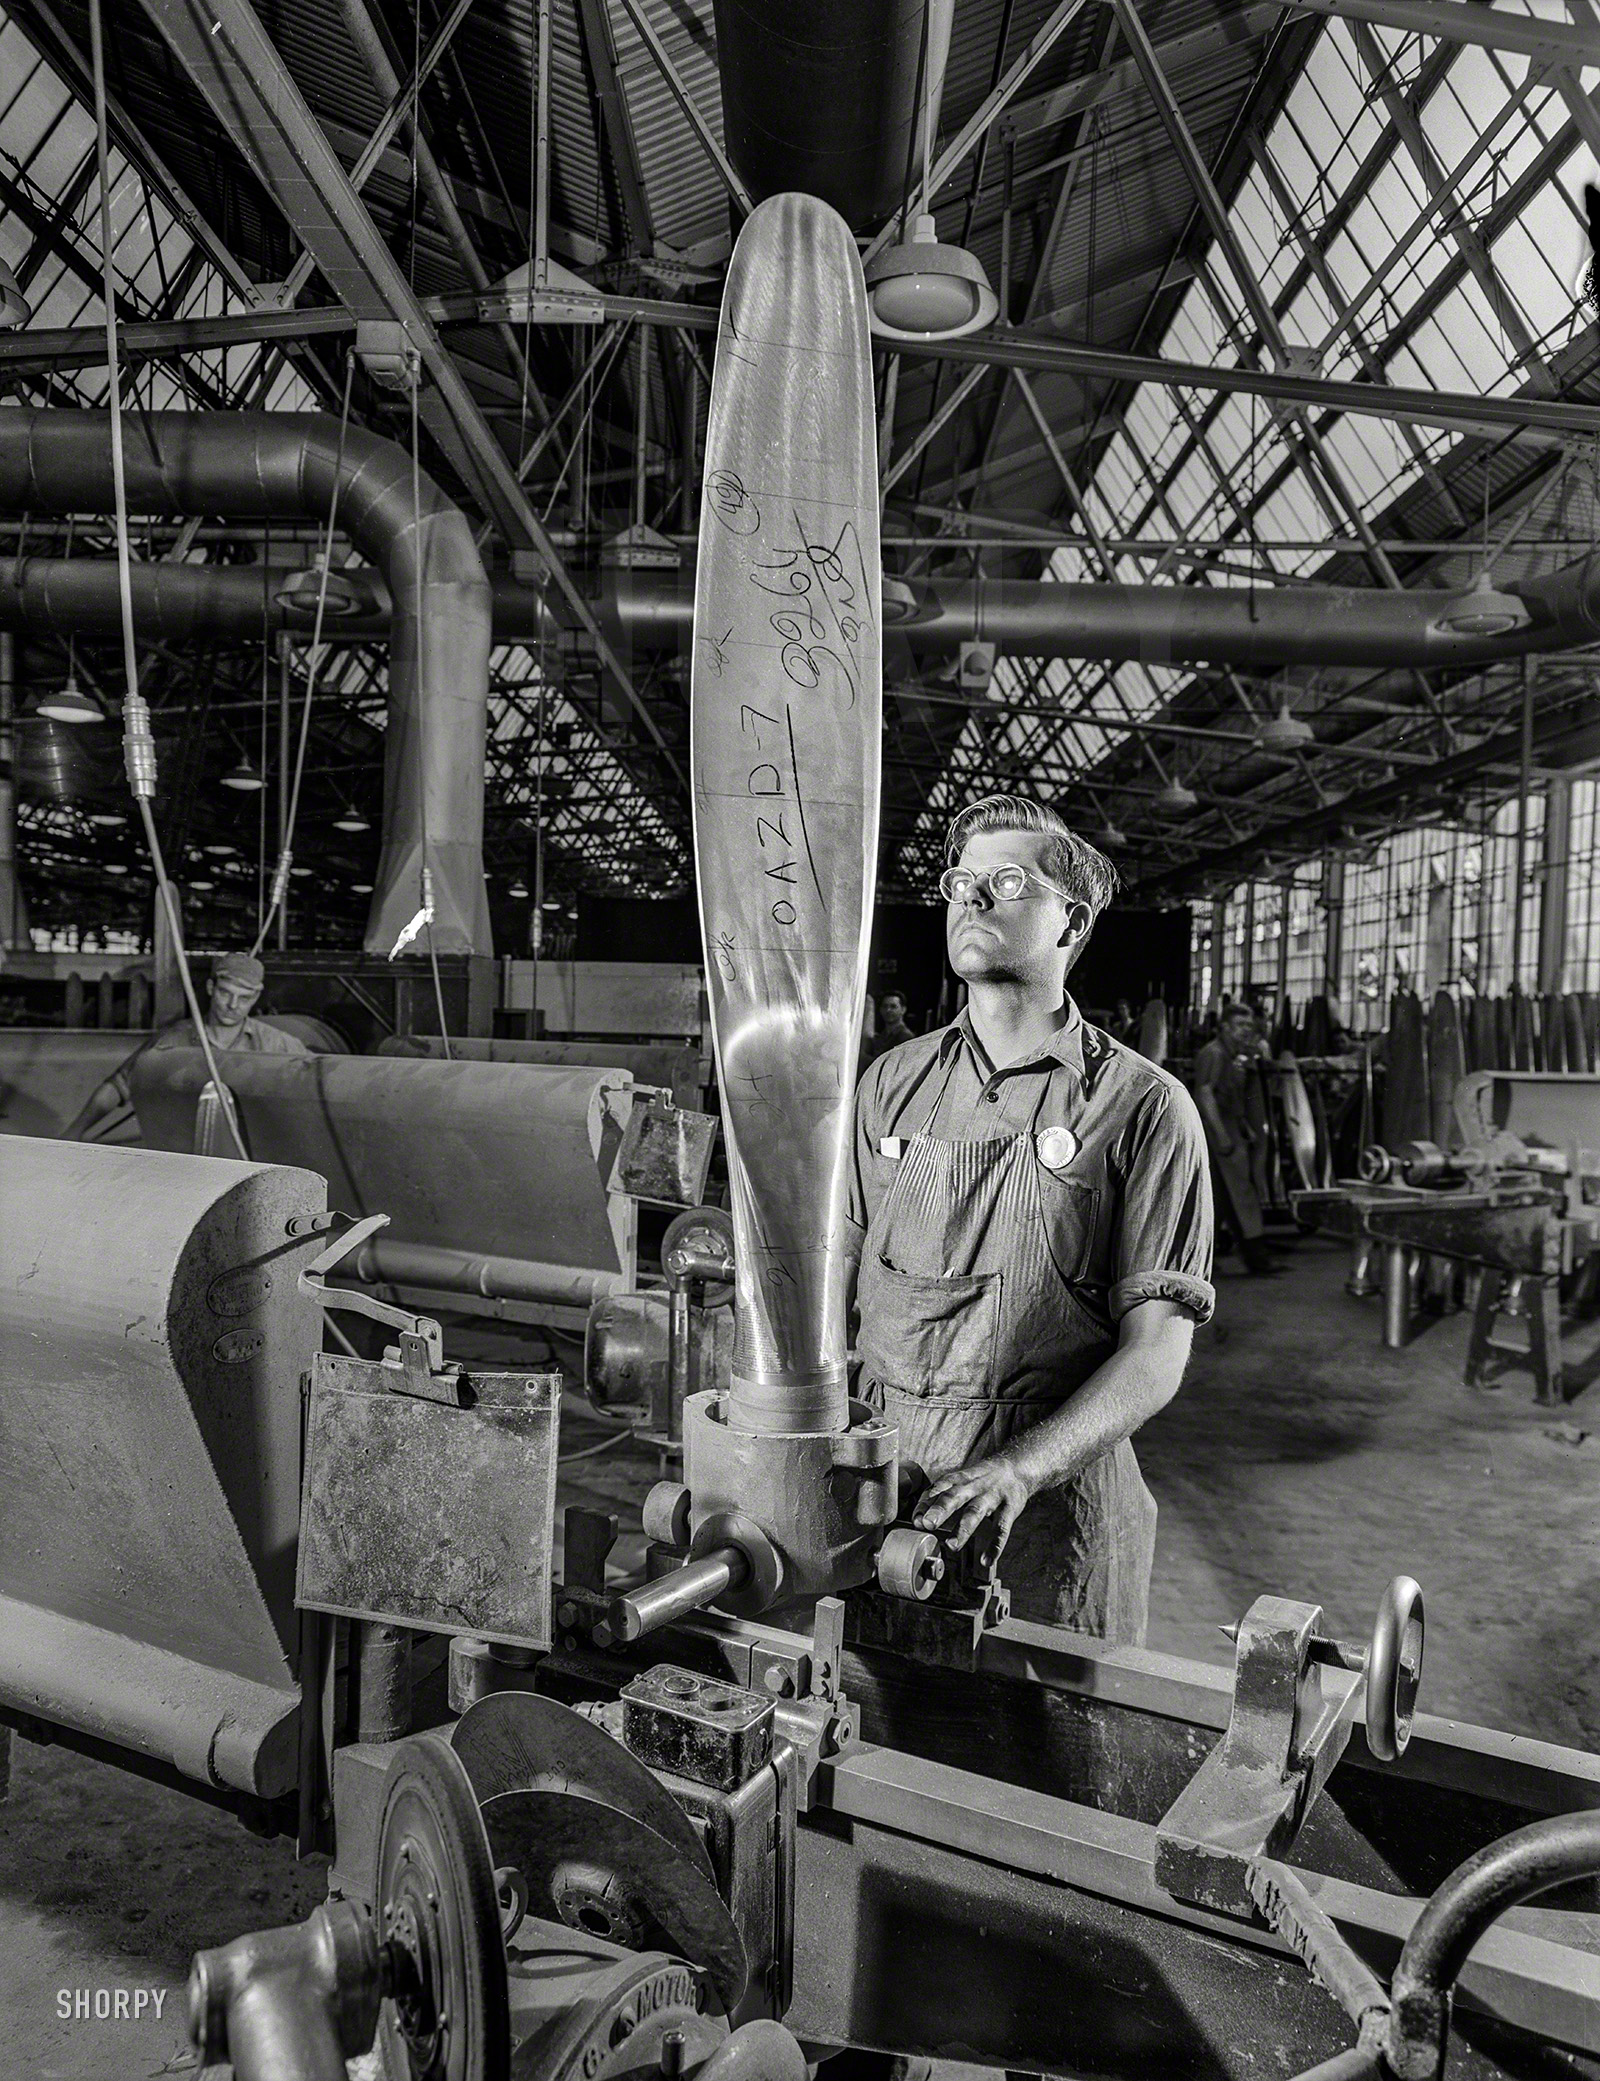 June 1942. "John Sonesen, propeller grinder at a Hartford, Connecticut, plant, inspects a blade for a vertical balance during the operation of grinding it to correct contours in a template. This Hamilton blade will be assembled in a pitch-controlling Hydra-Matic mechanism to help power one of our new warplanes." Photo by Andreas Feininger for the Office of War Information. View full size.